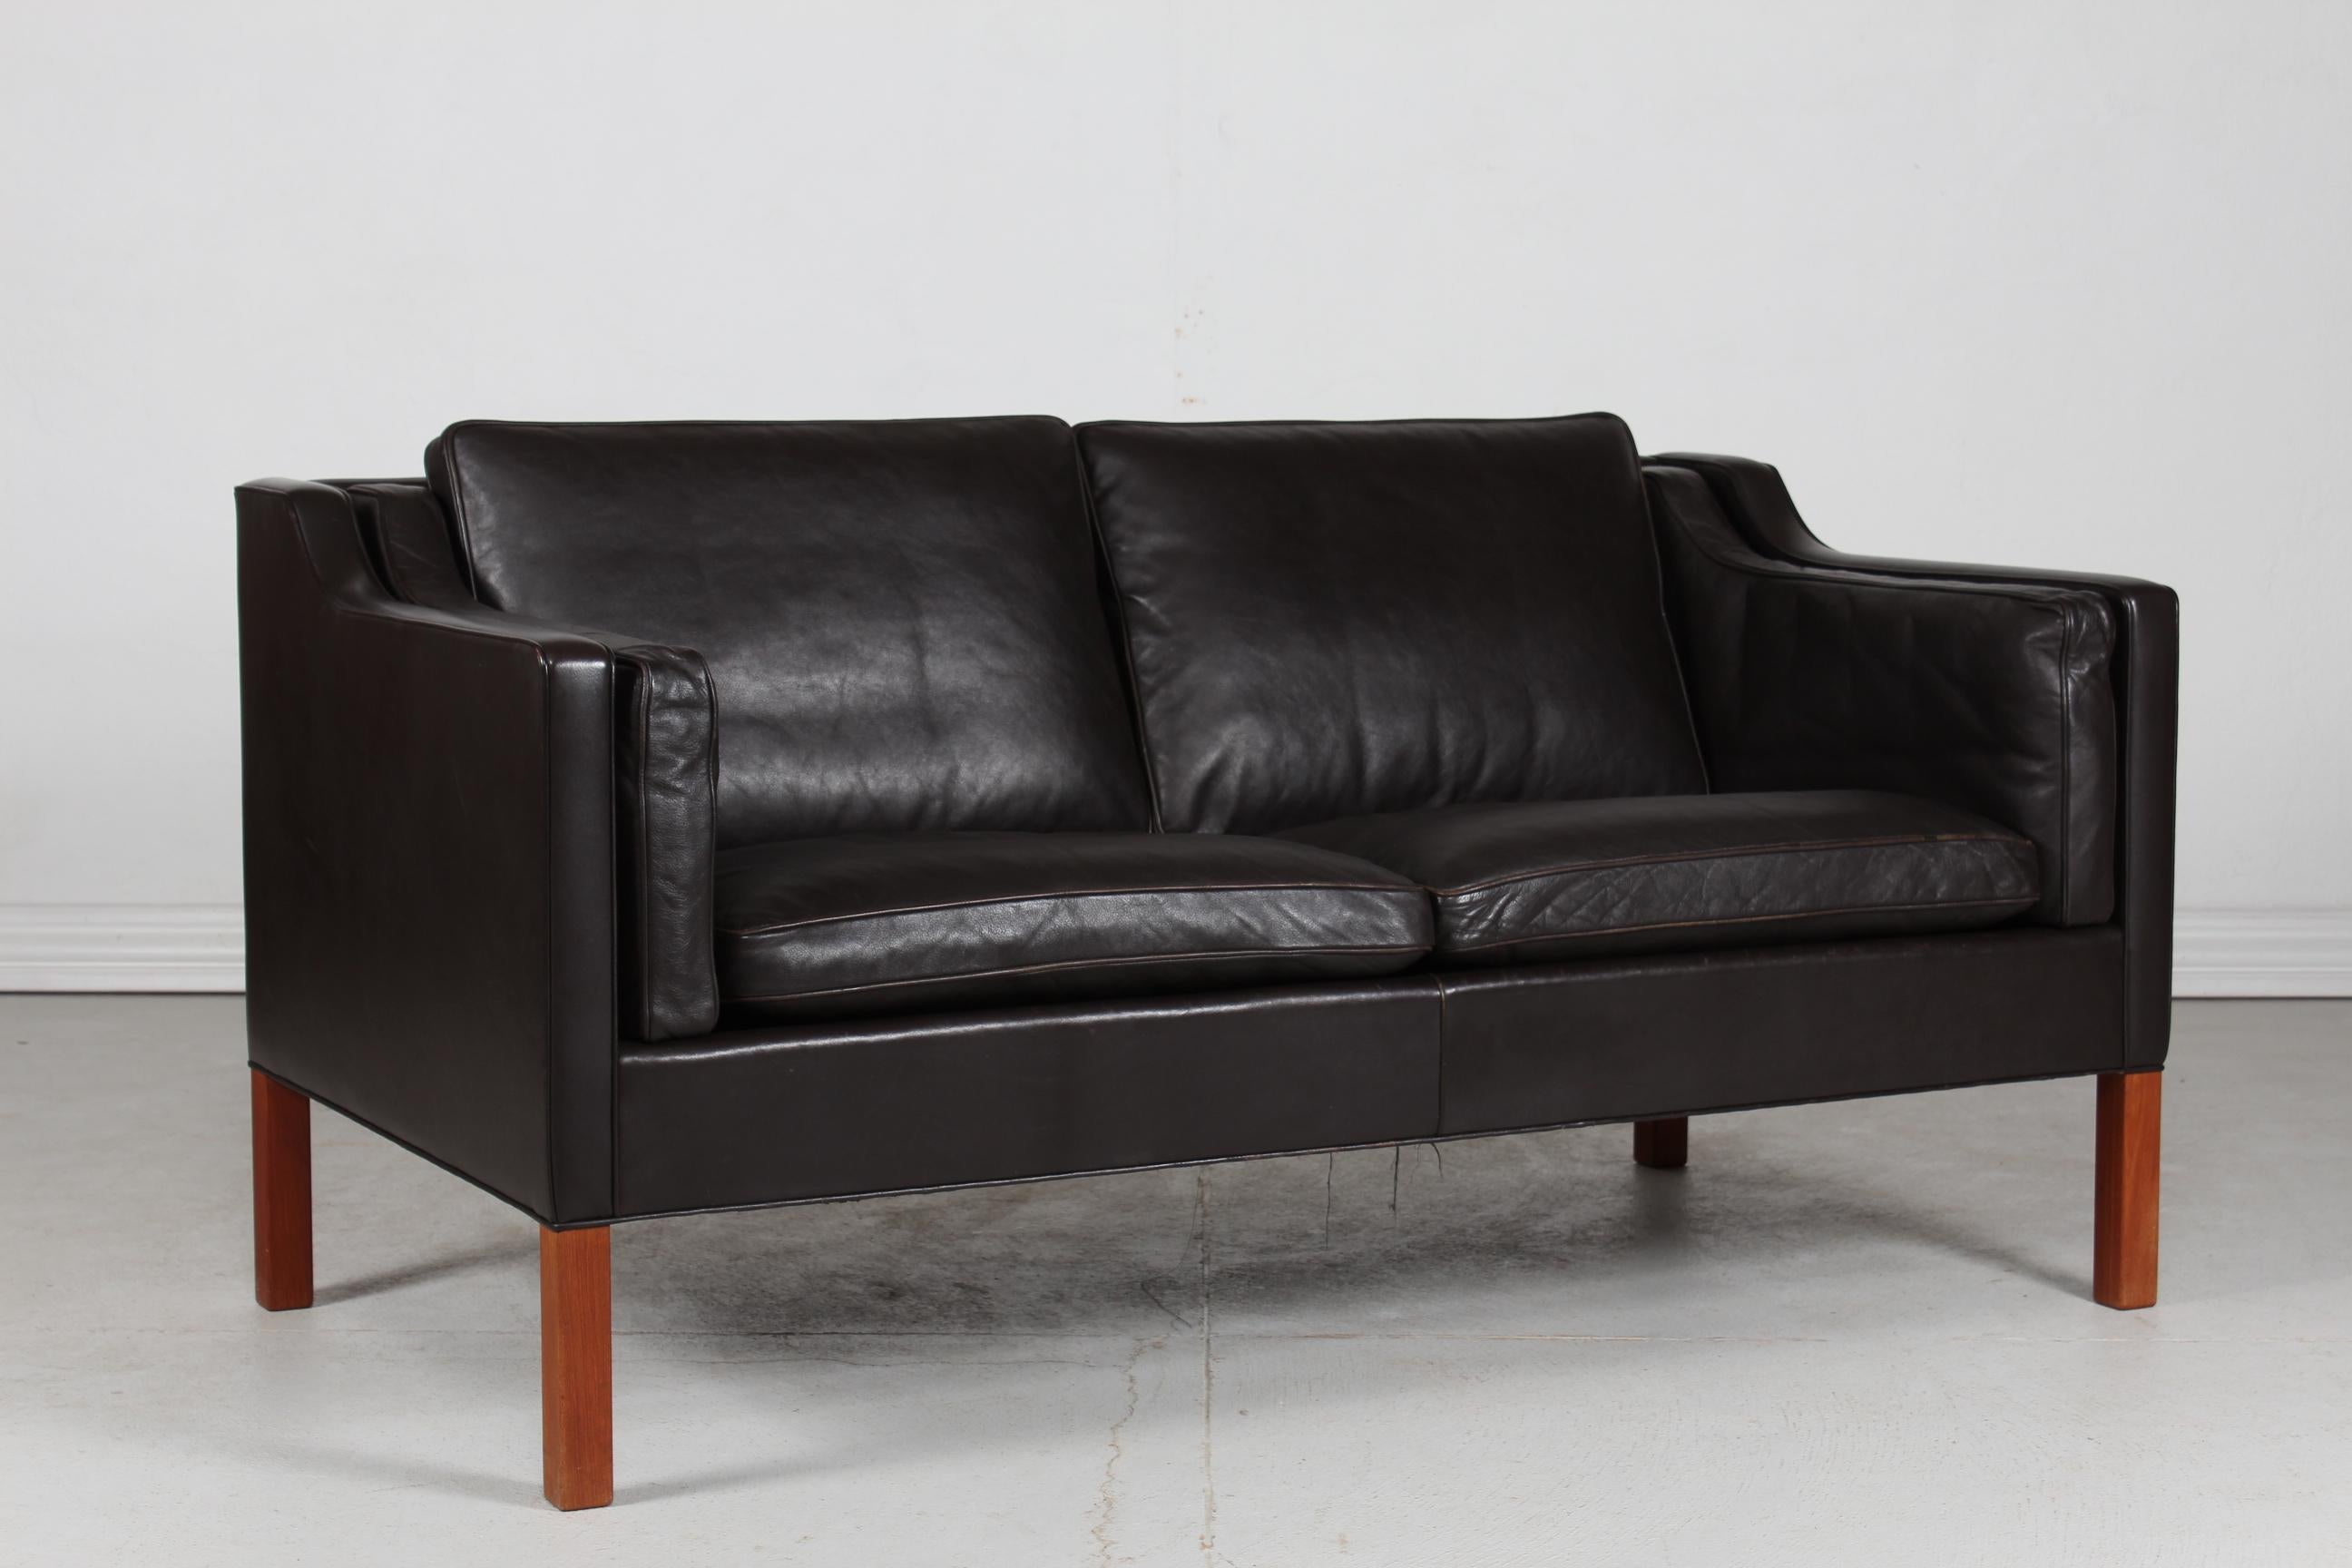 Danish vintage Børge Mogensen sofa 2 persons model 2212.
It's upholstered with the original dark mocha colored leather, almost black. 
The legs are made of solid teak with oil treatment.
The cushions are filled inside with granules and natural